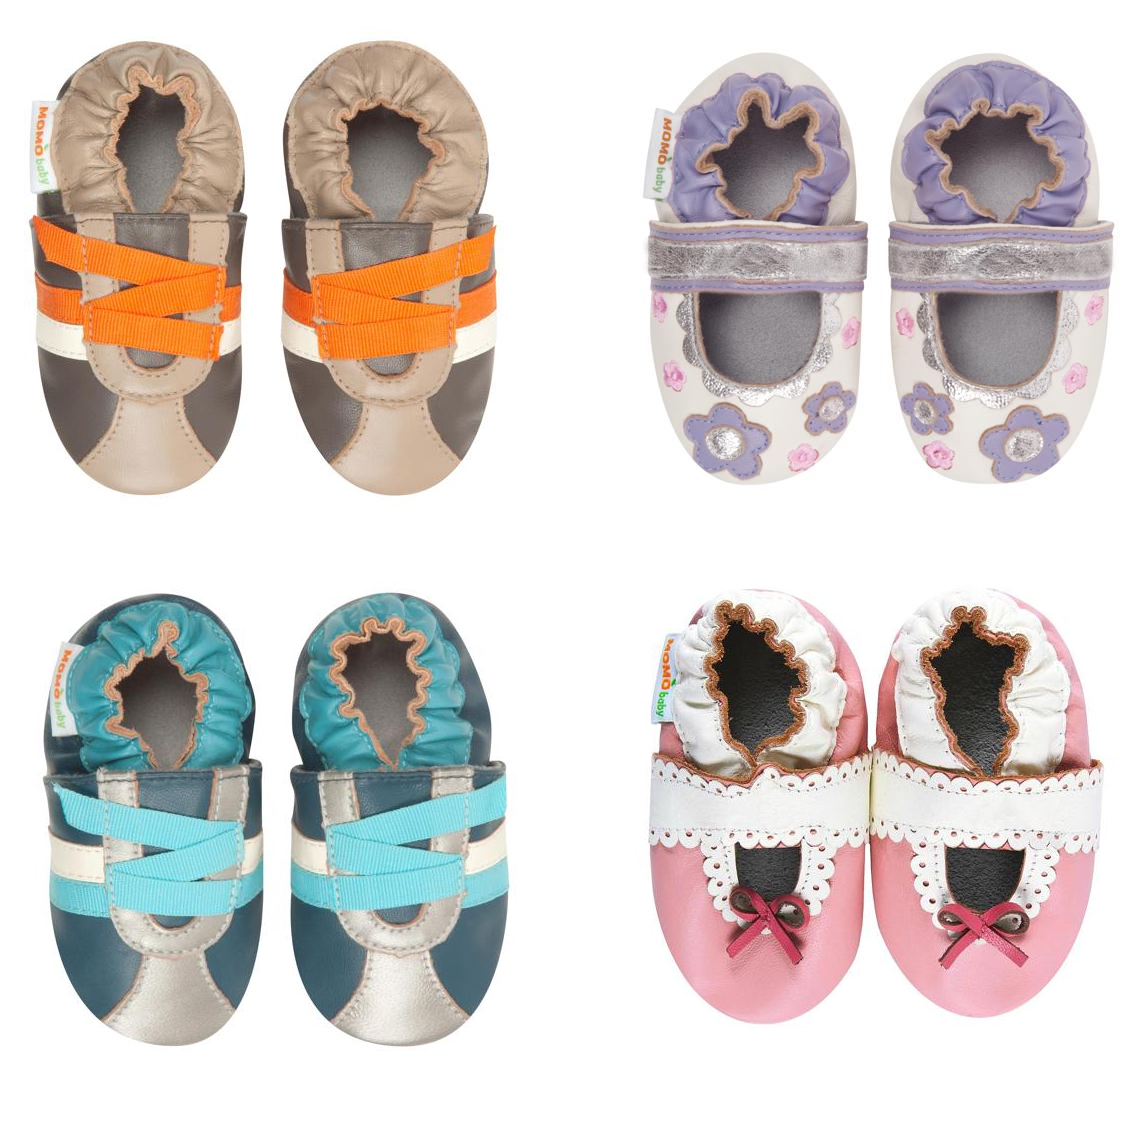 Momo Soft Baby (Infant/Toddler) Shoes Only $11.99 Shipped!